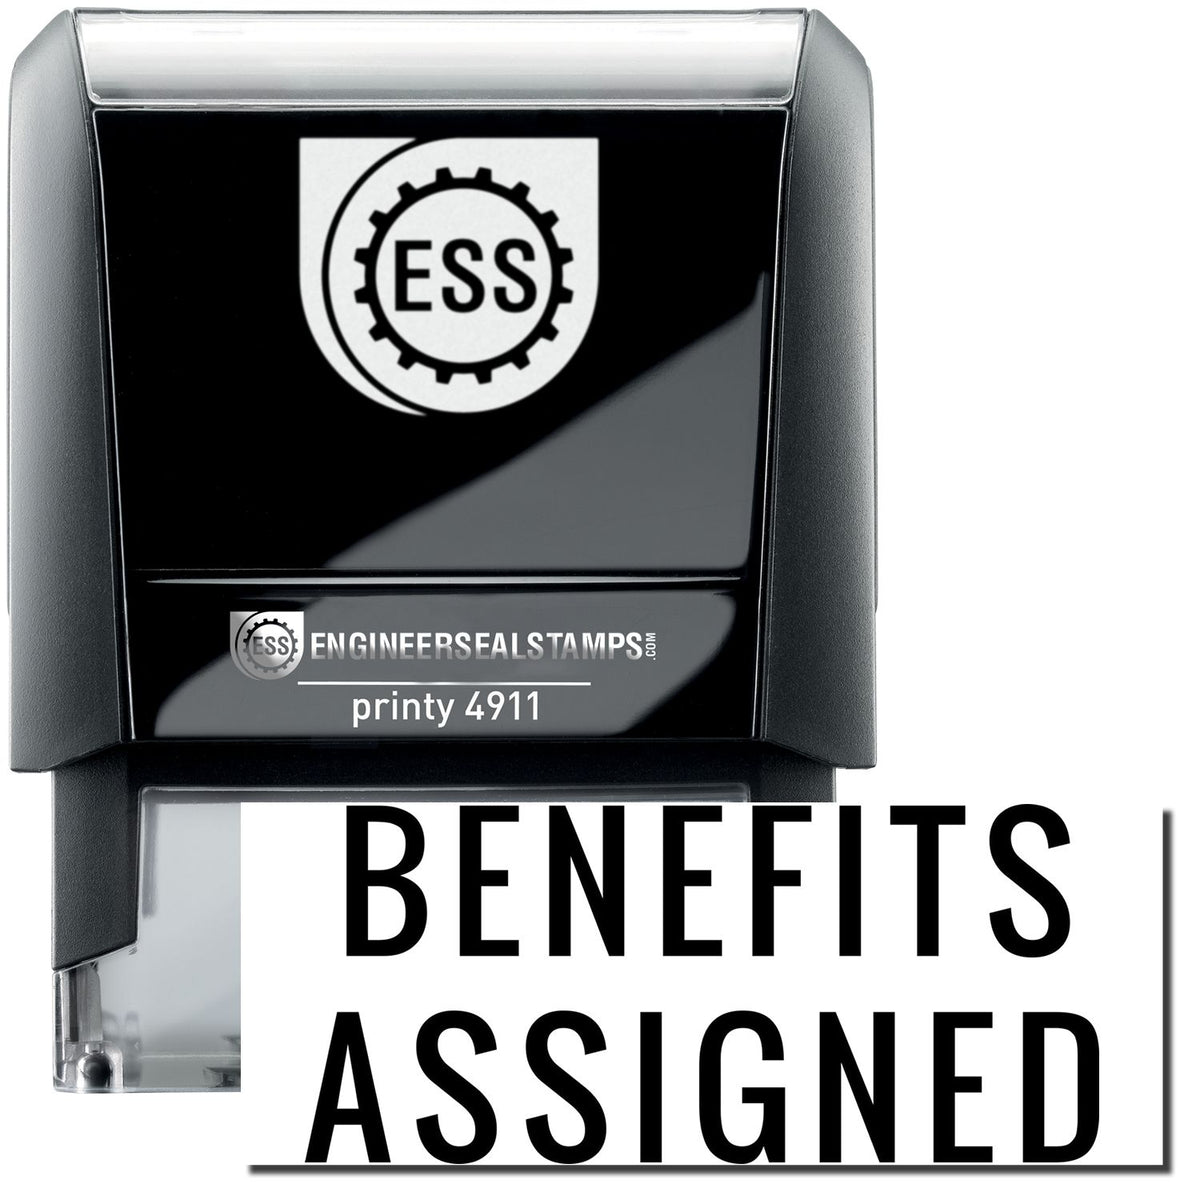 A self-inking stamp with a stamped image showing how the text &quot;BENEFITS ASSIGNED&quot; in a narrow font is displayed after stamping.